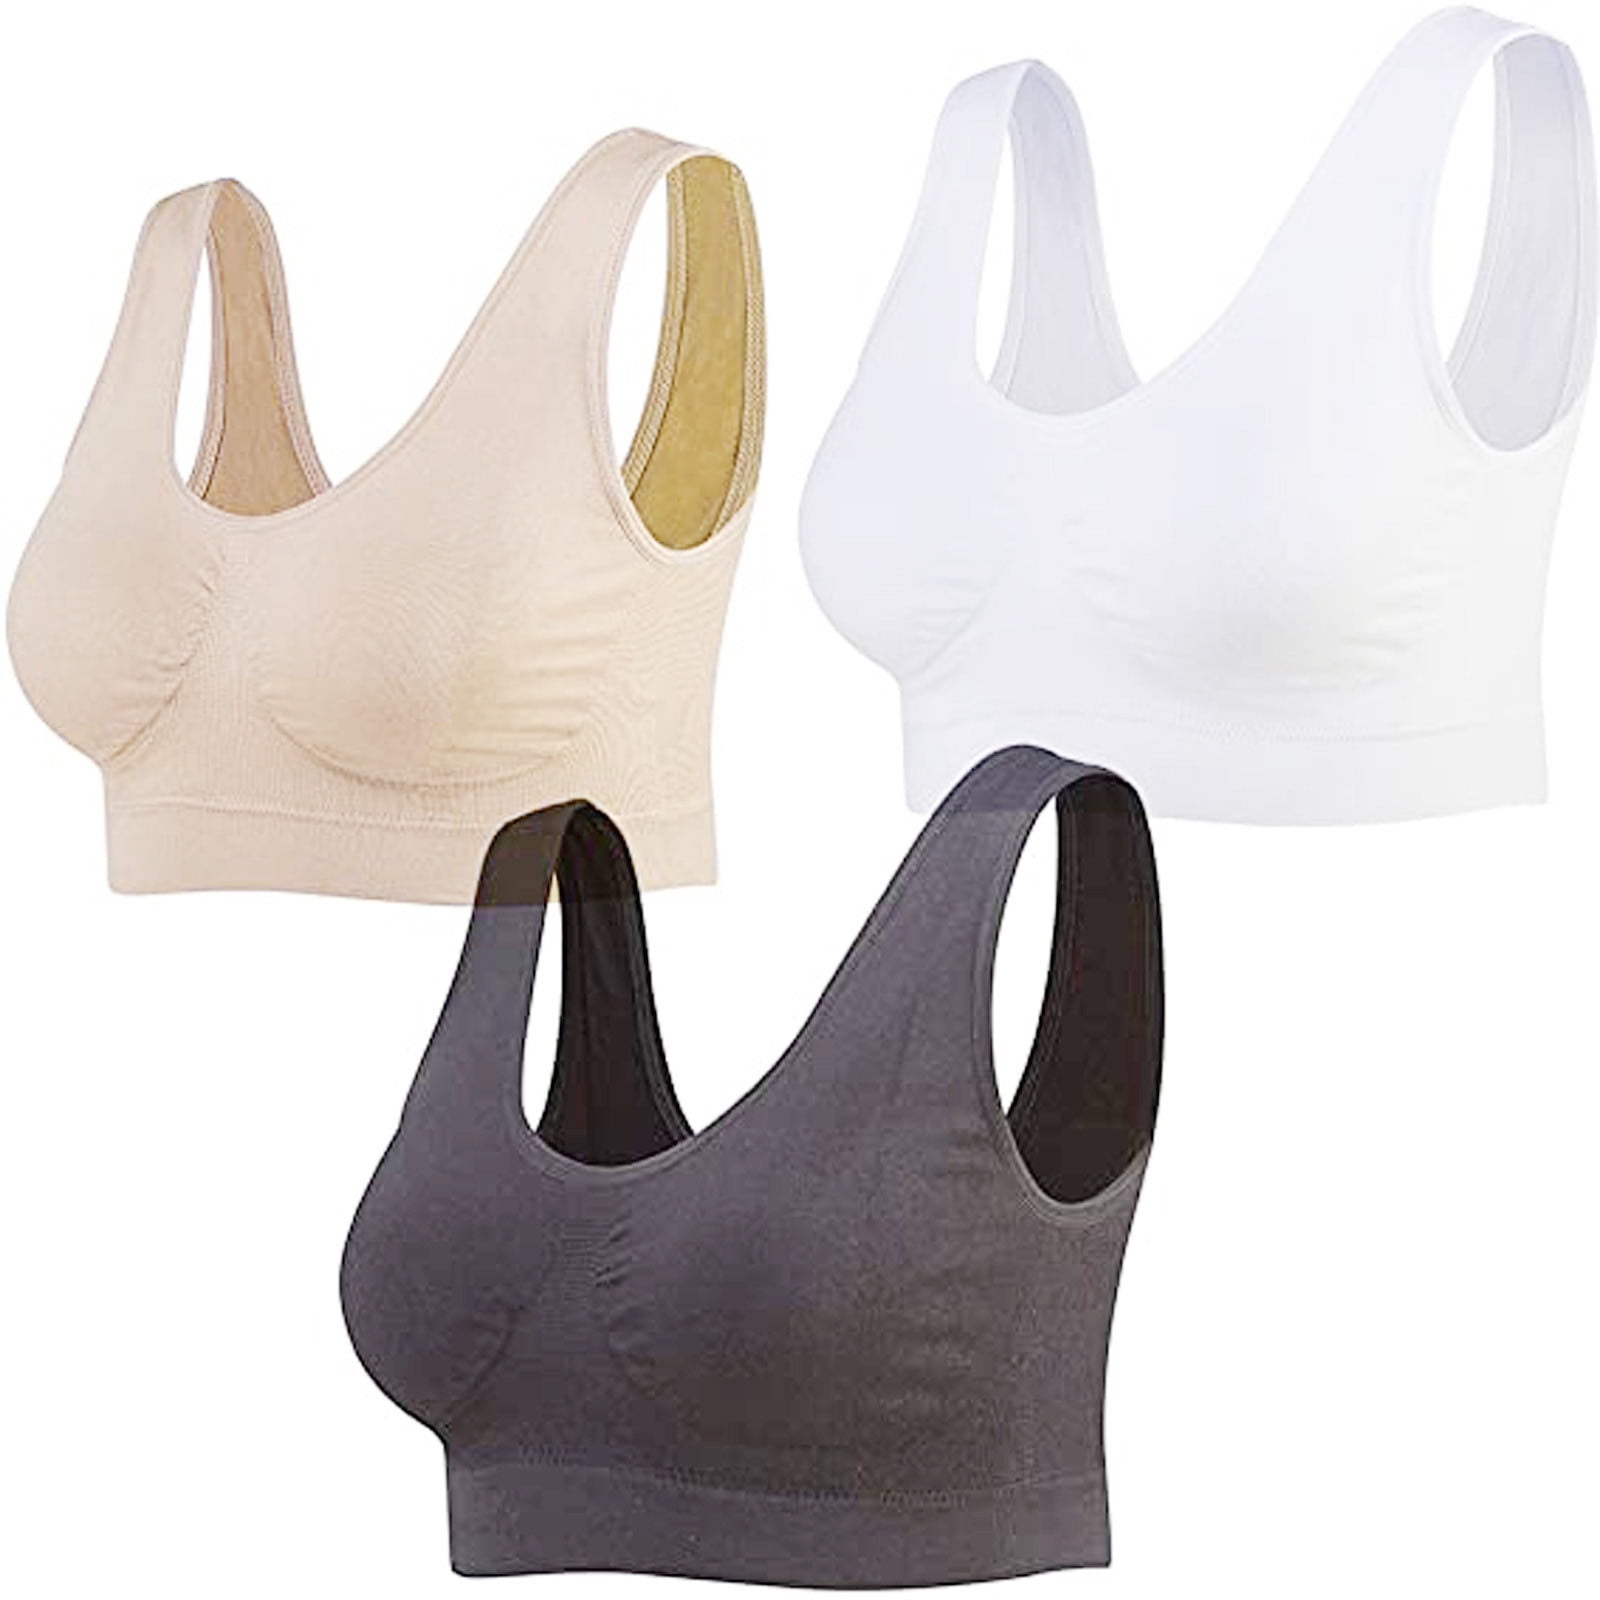 3 Packs Women's Comfort Workout Sports Bra Low-Impact Activity Sleep Bras Seamless Wirefree Yoga Bra with Removable Pads 